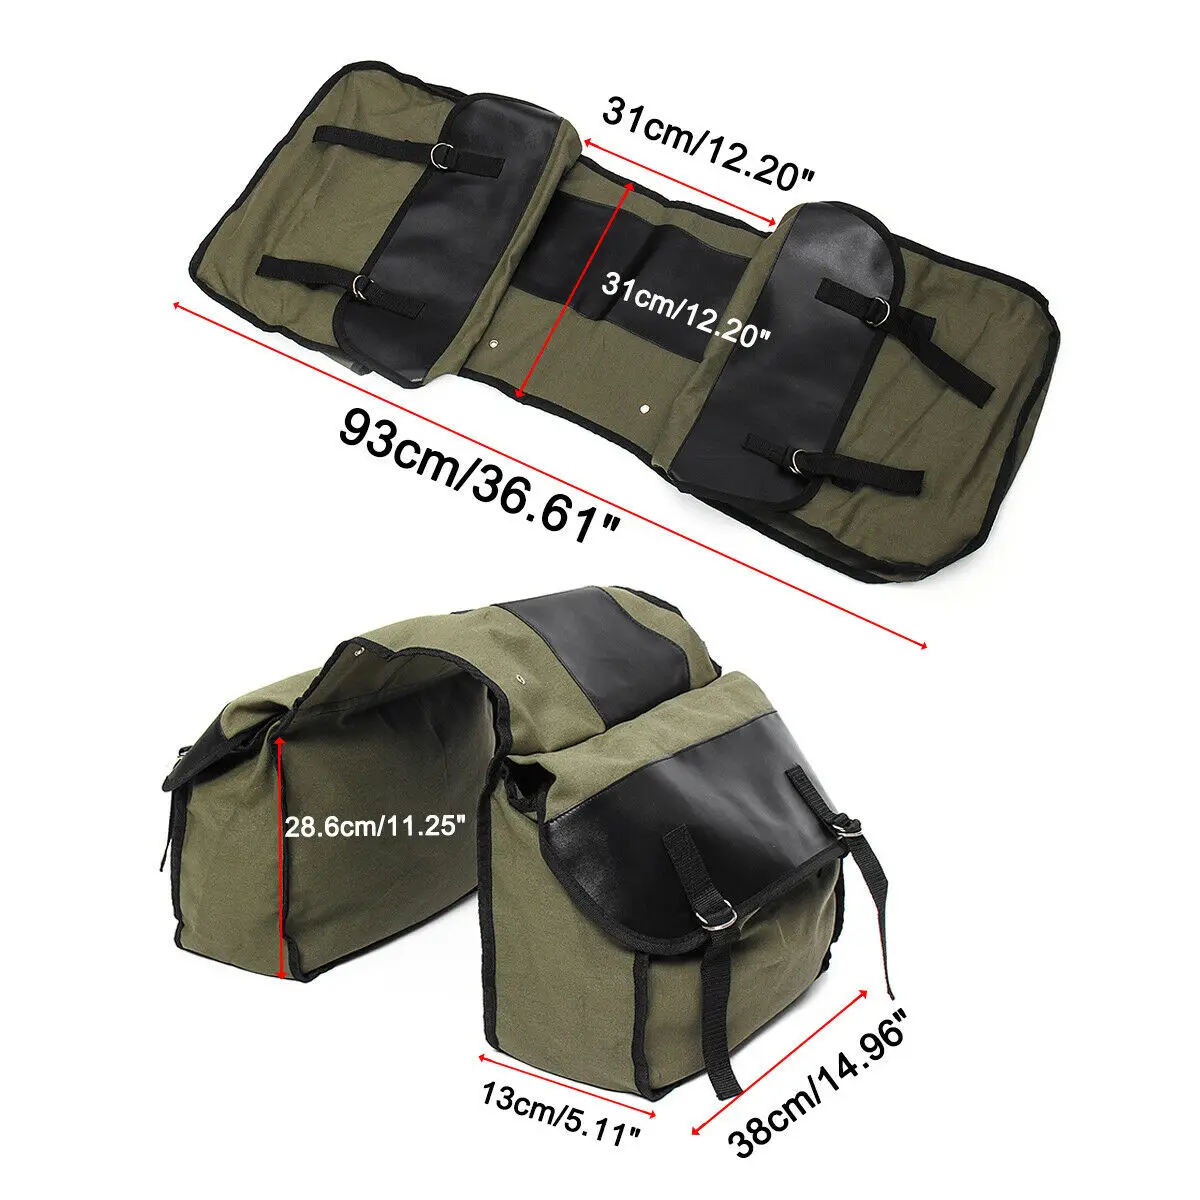 2021 New Update Travel Motorcycle Mountain Bike Rear Saddle Canvas Bag Riding Aggravated Waterproof Car Side Tool Bag